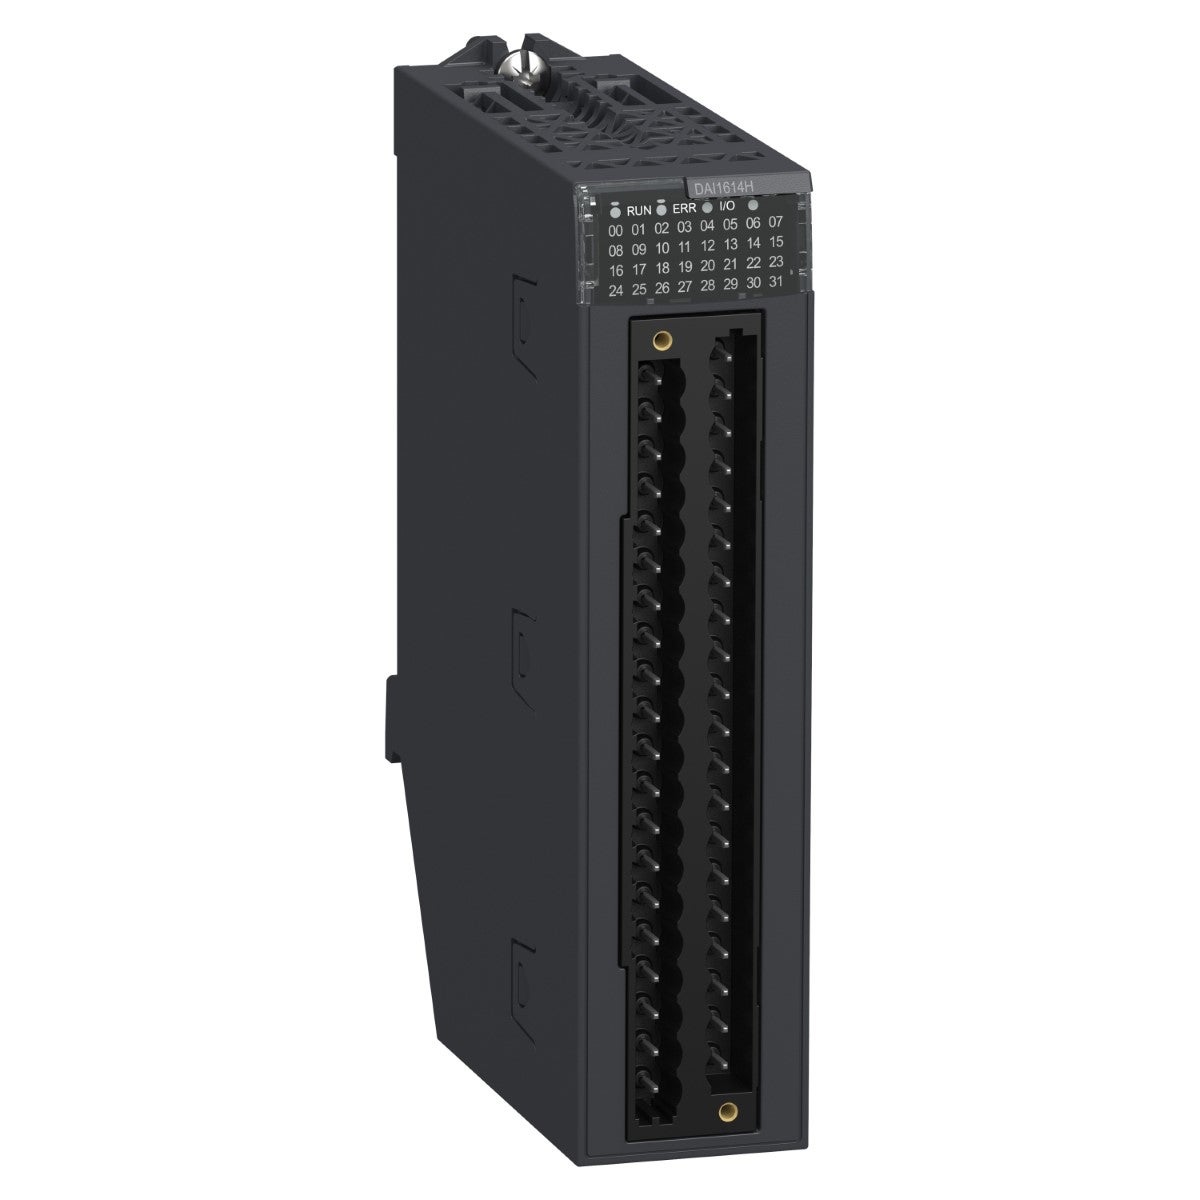 Discrete input module, Modicon X80, 16 isolated inputs, 100 to 120V AC, for severe environments